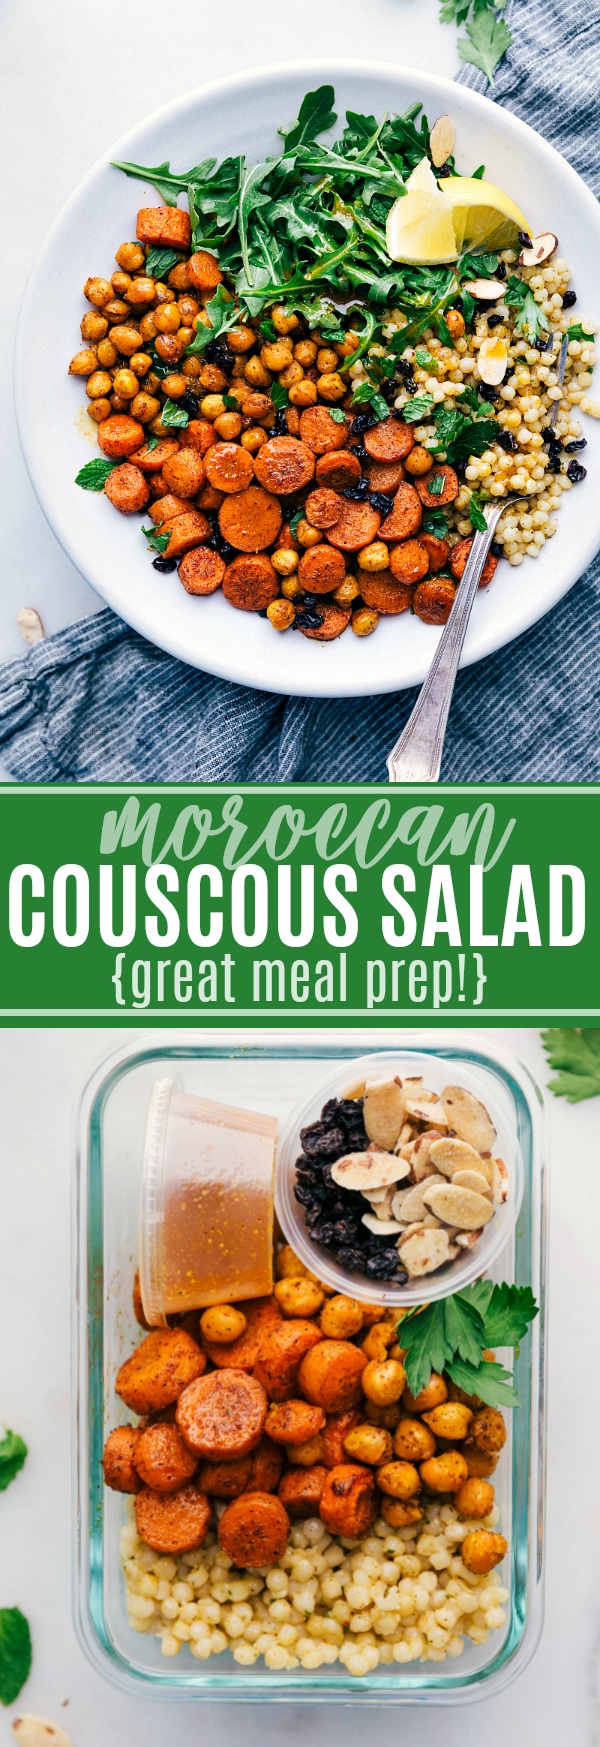 This Moroccan Carrot Salad is packed with flavor and healthy ingredients. From the roasted seasoned carrots and chickpeas to the garlicky couscous and citrus dressing, every bite is a treat! via chelseasmessyapron.com #meal #prep #recipe #recipes #easy #quick #healthy #kid #friendly #carrot #moroccan #morocco #salad #couscous #chickpea #mealprep #almond